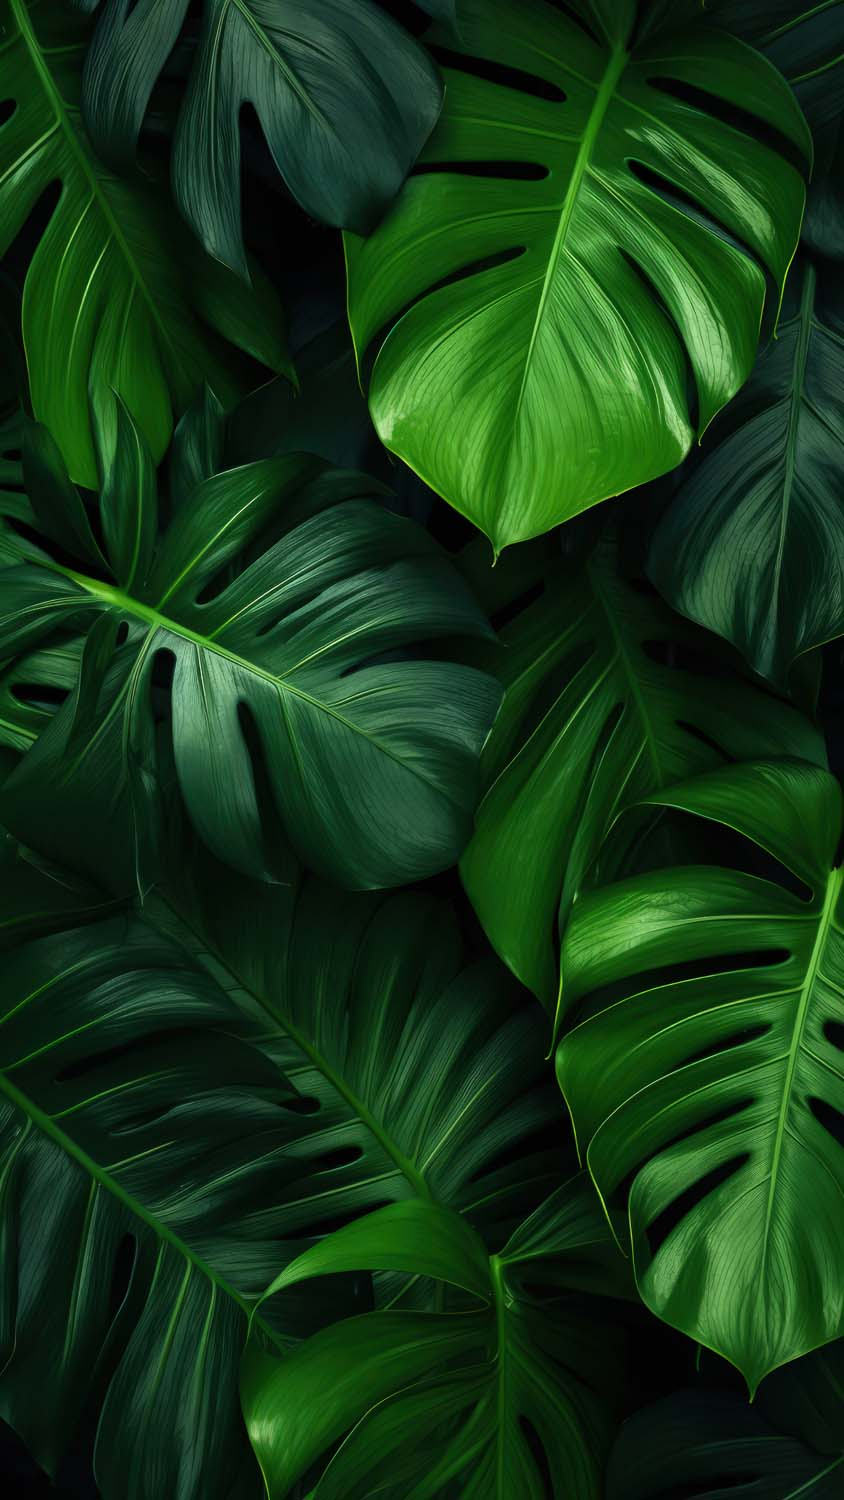 Green Foliage Leaves iPhone Wallpaper